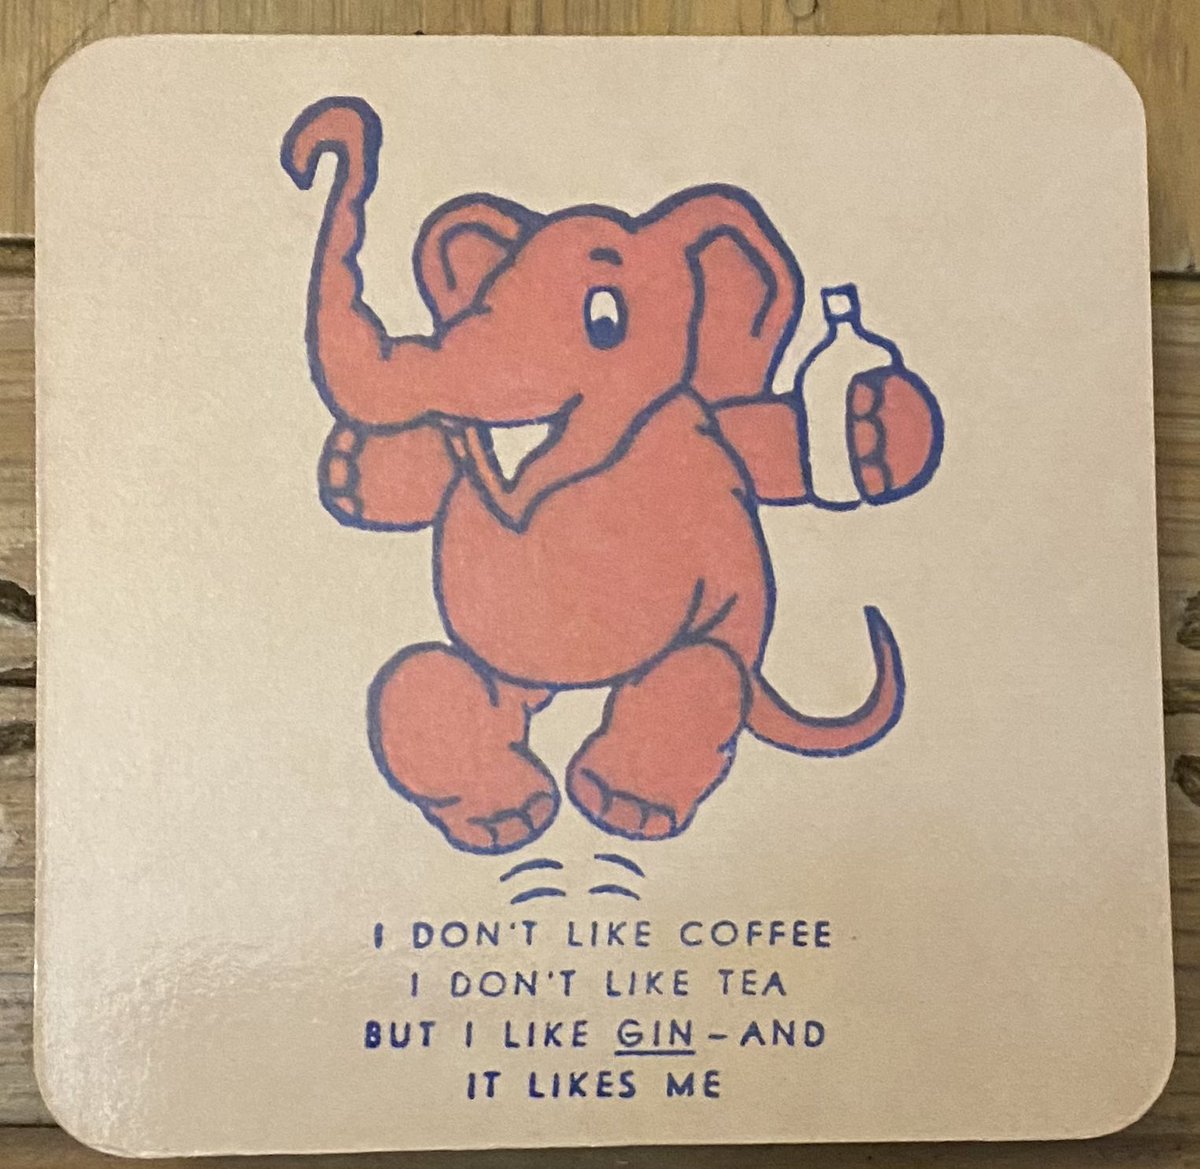 Courtesy of the eagle-eyed thrift store sifter, @scooter5000 . (And actually I do like coffee.)